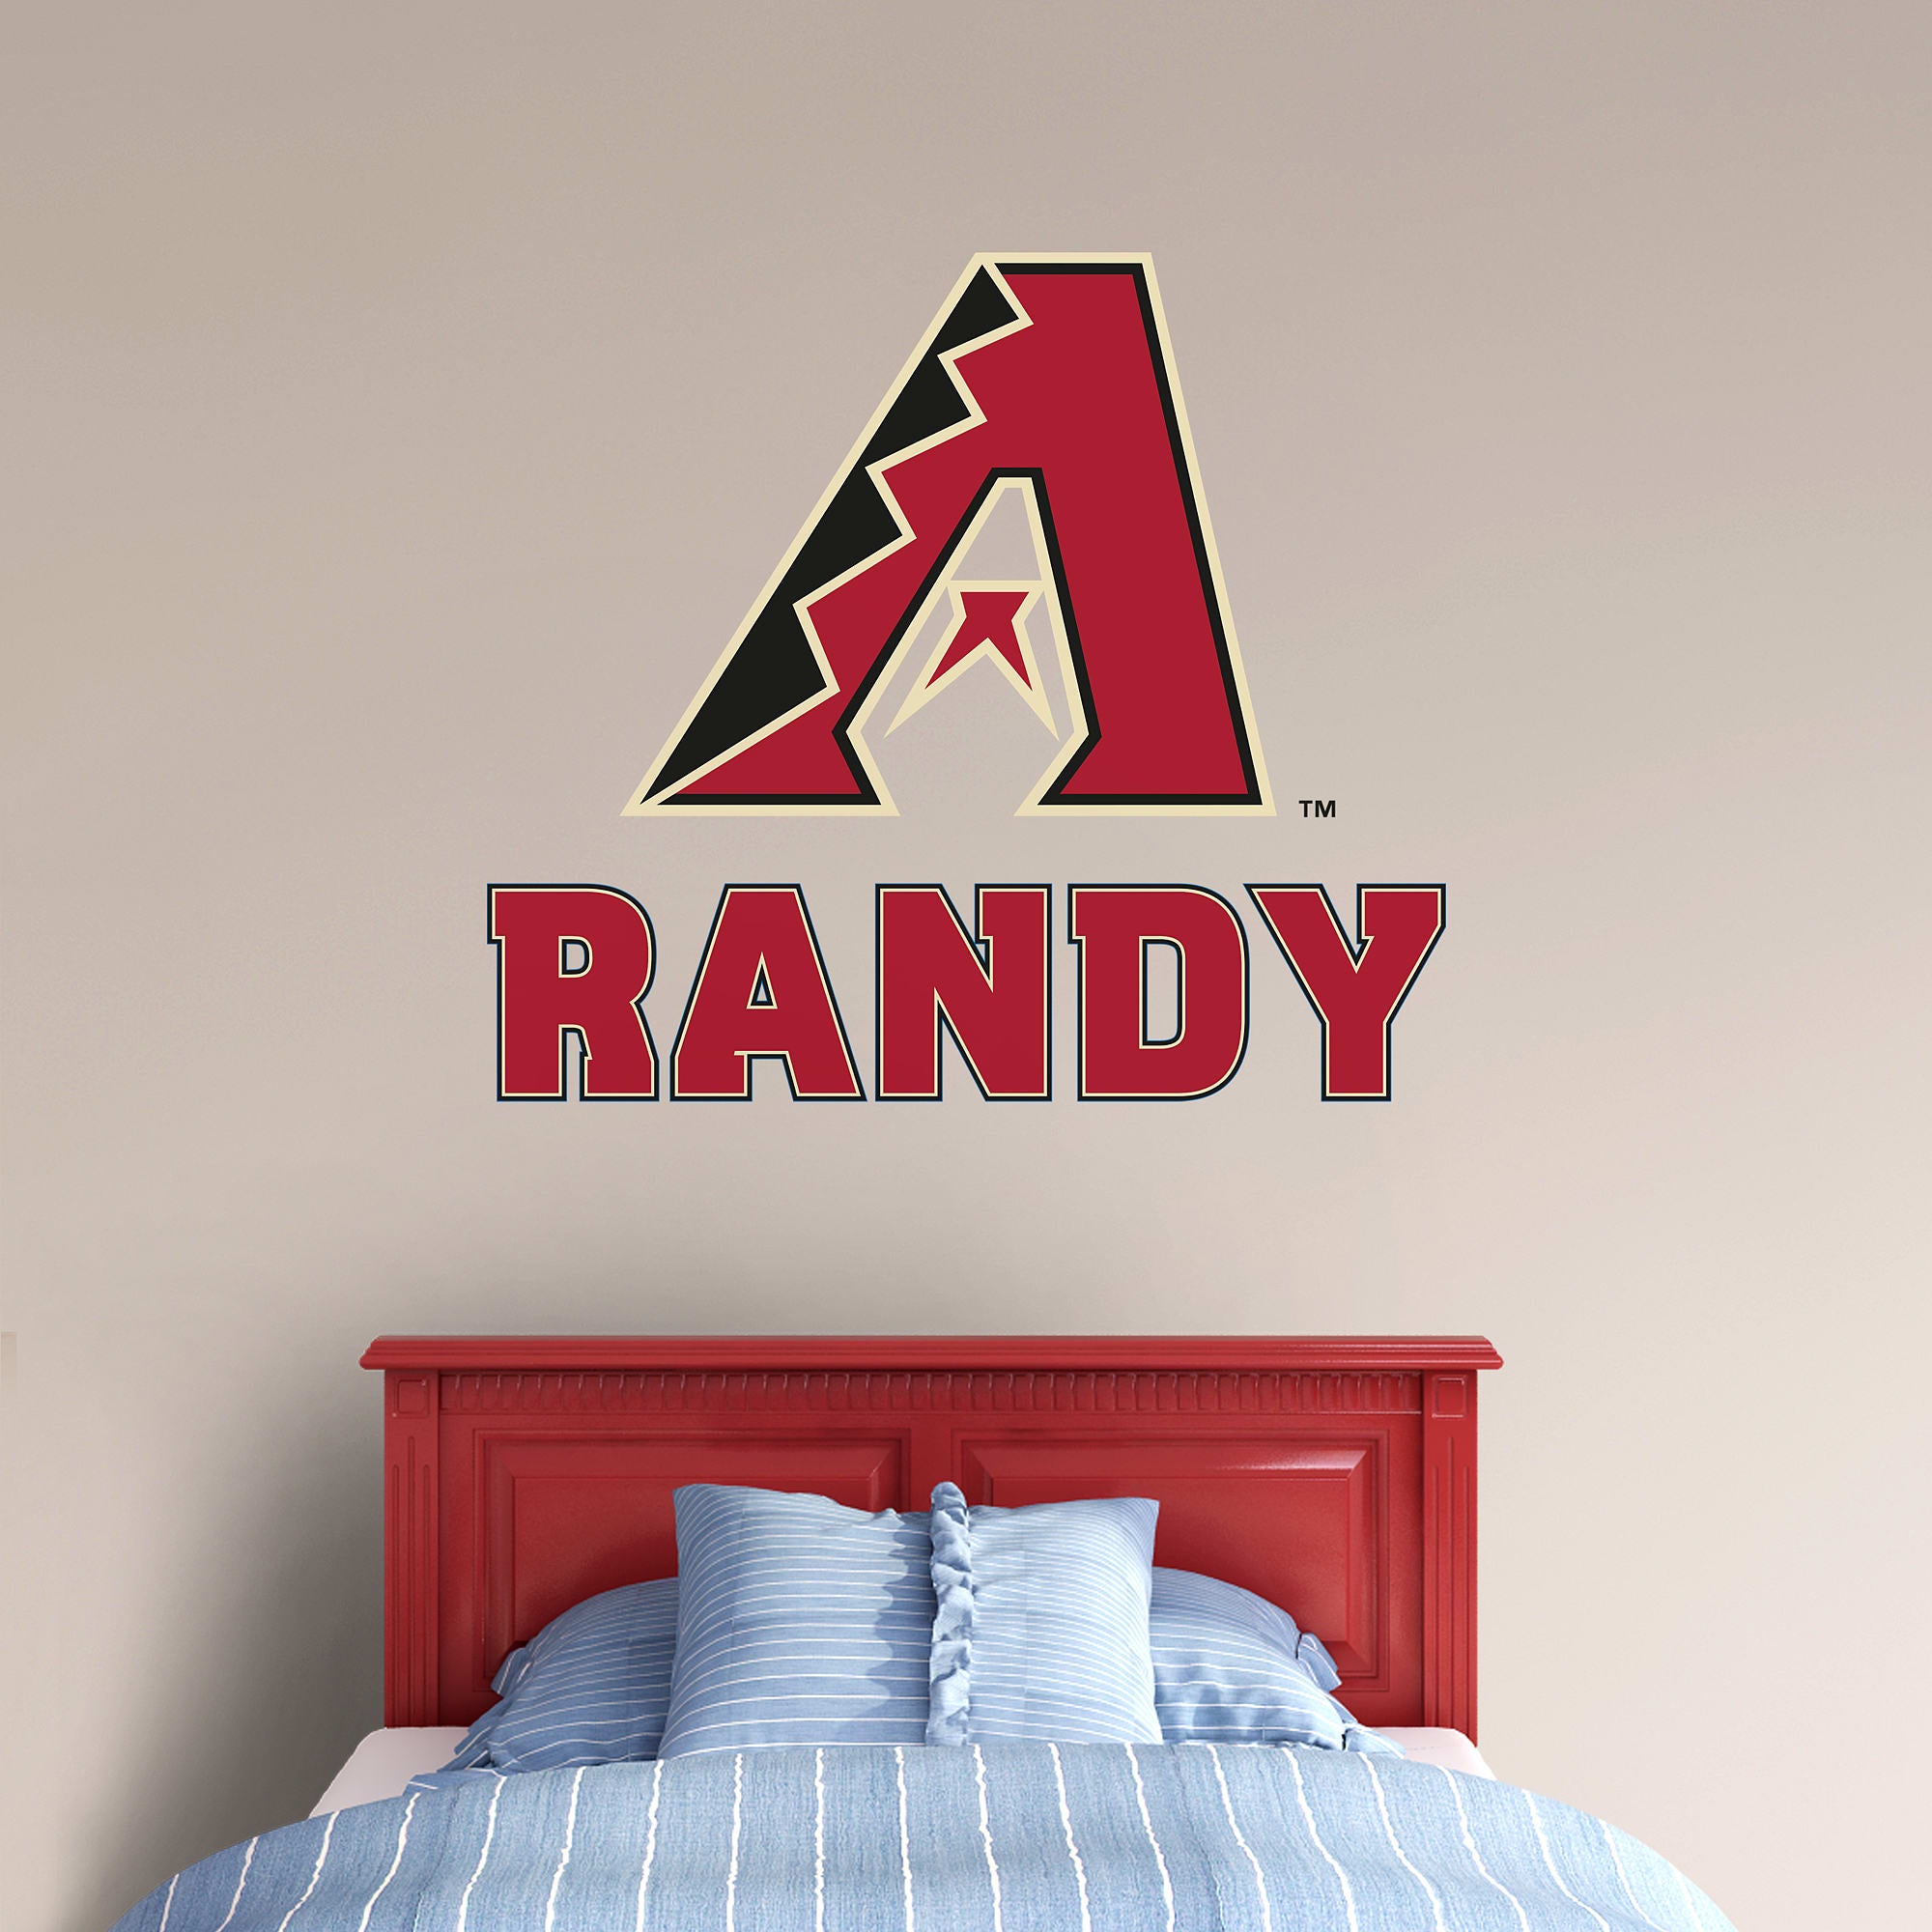 Arizona Diamondbacks: Stacked Personalized Name - Officially Licensed MLB Transfer Decal in Red (52"W x 39.5"H) by Fathead | Vin